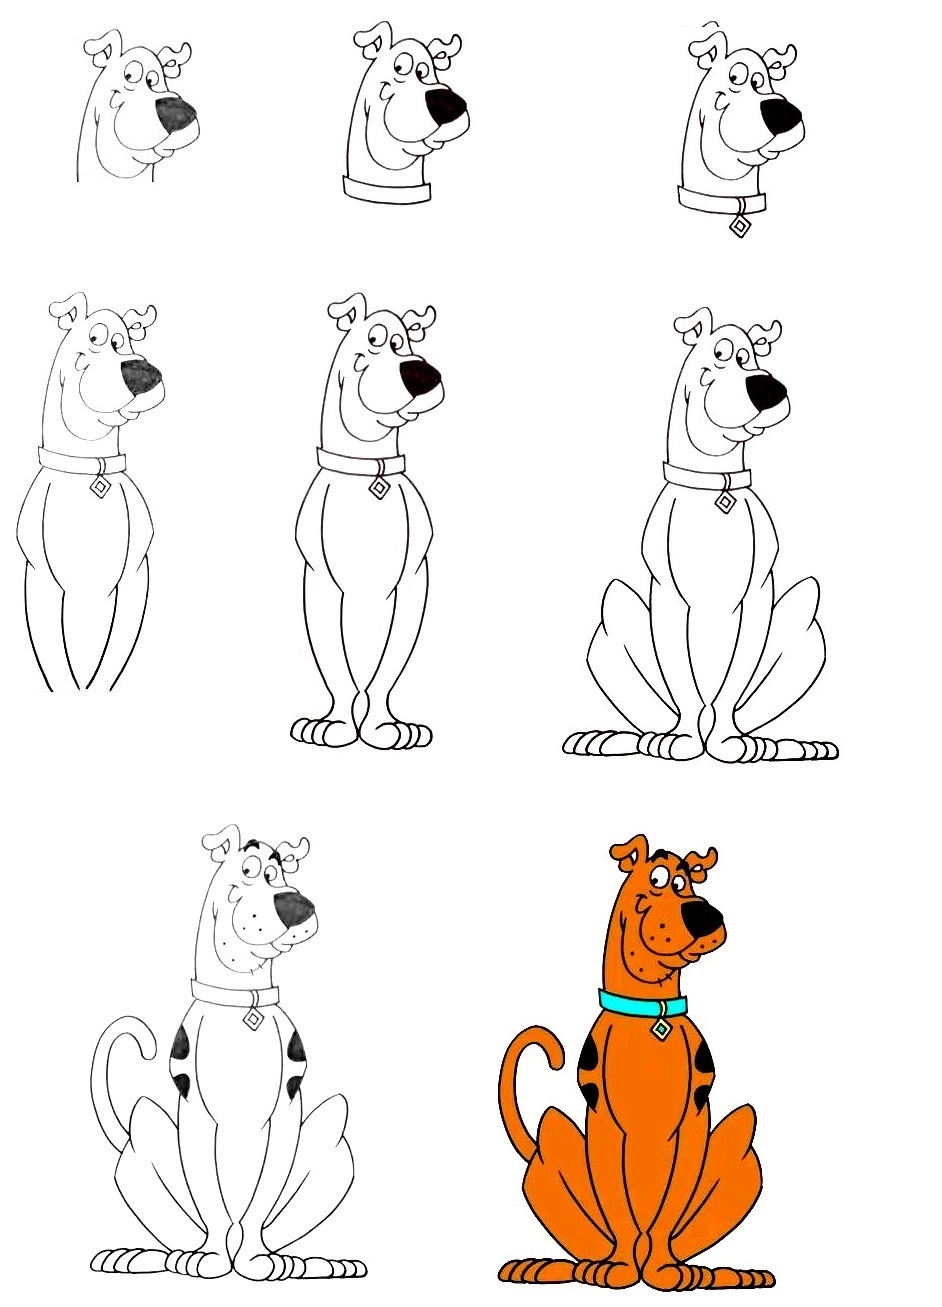 Scooby Doo-Drawing